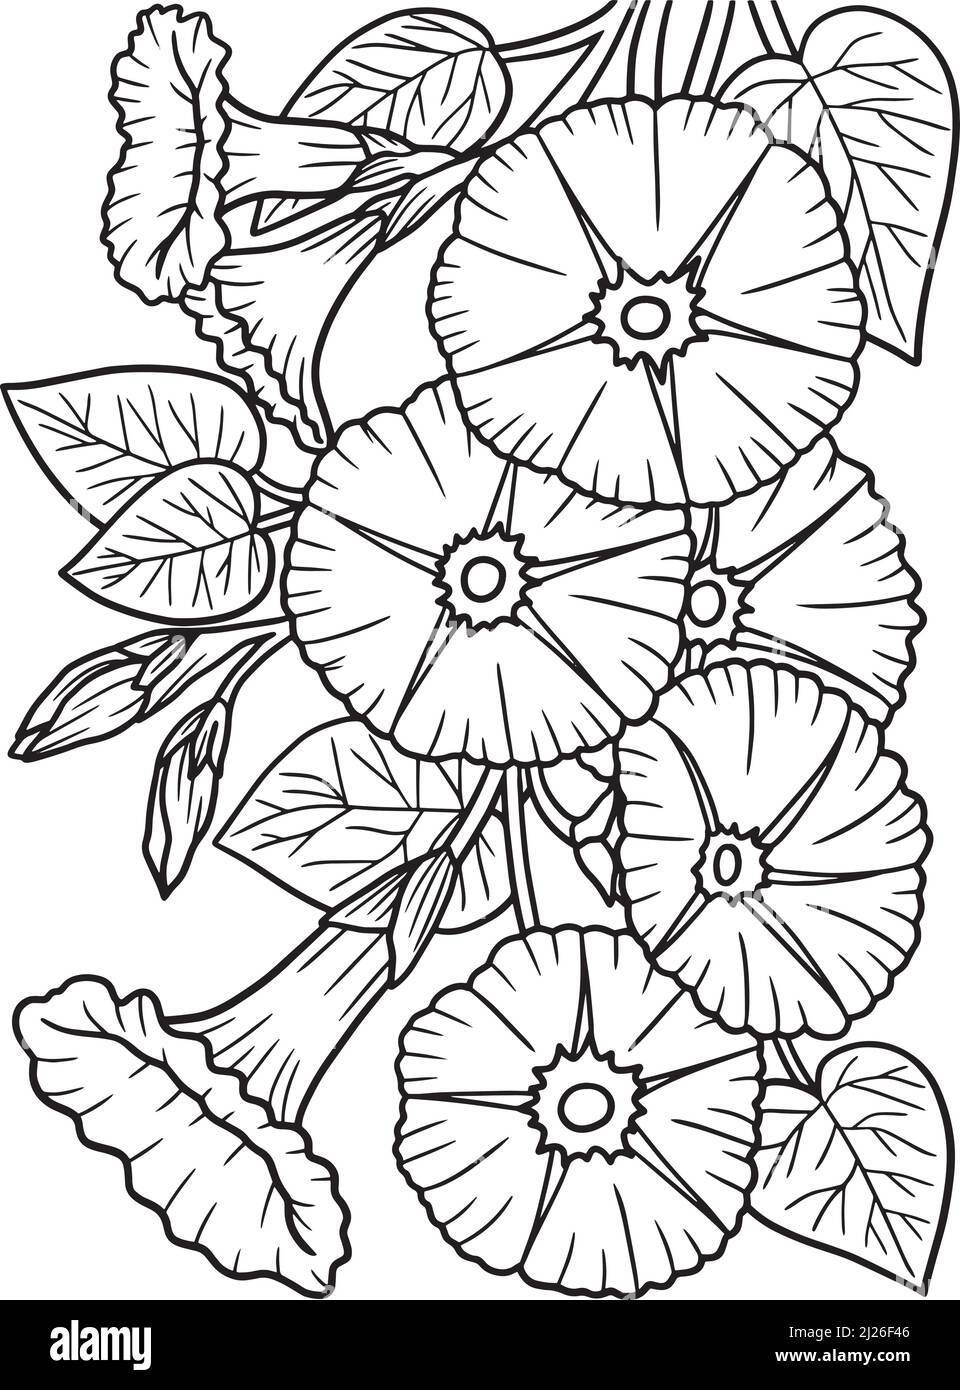 Morning Glory Flower Coloring Page for Adults Stock Vector